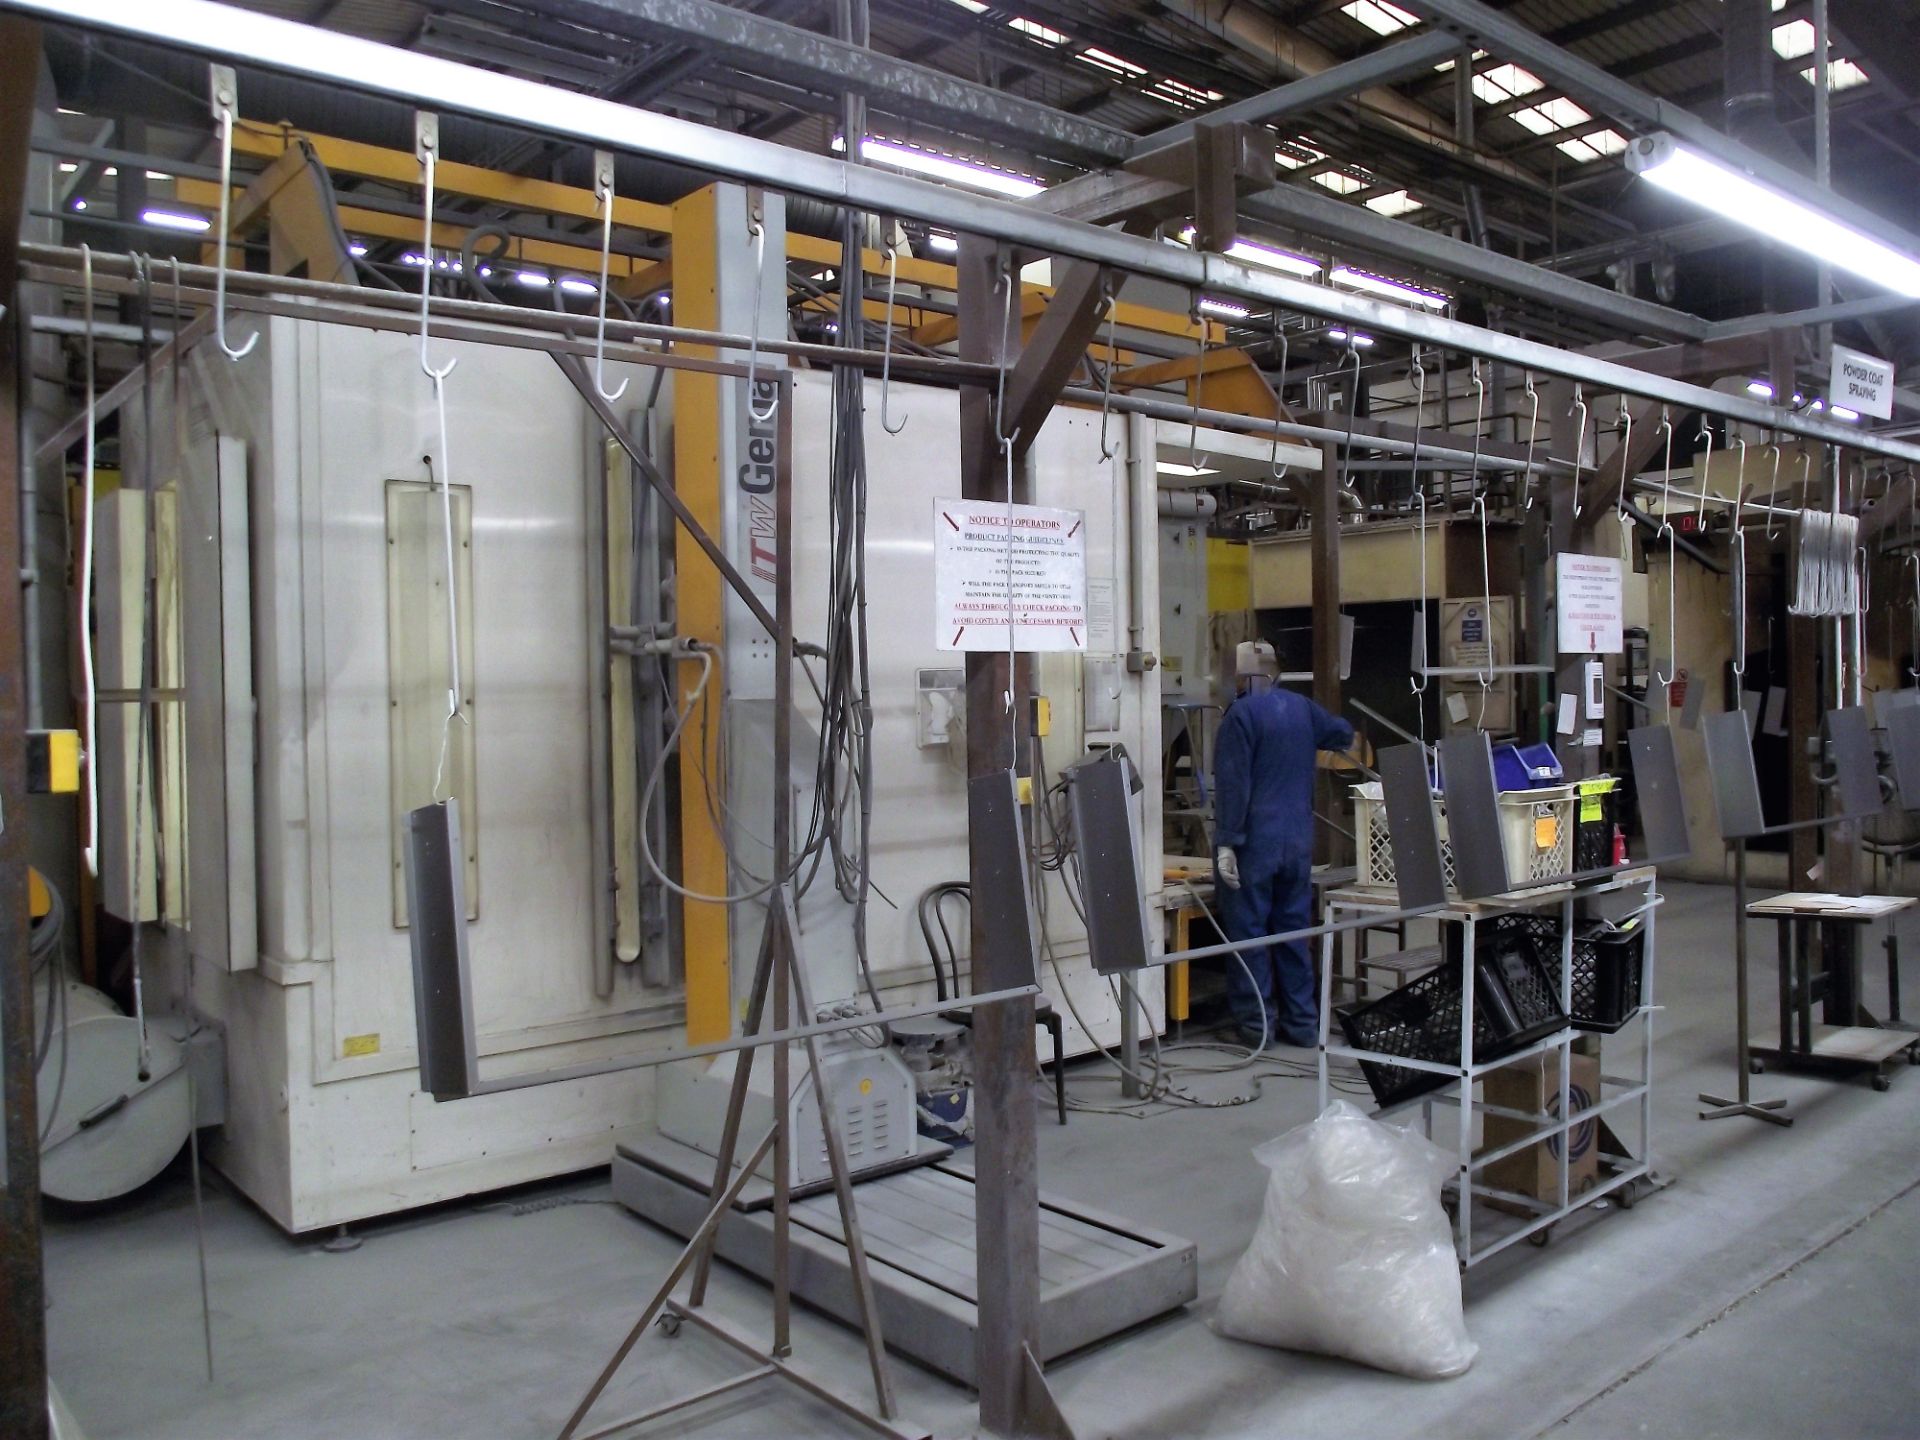 Fully Automated Powder Coating Line cw On Line Chemical "Wet" Pre-treatment Facility.